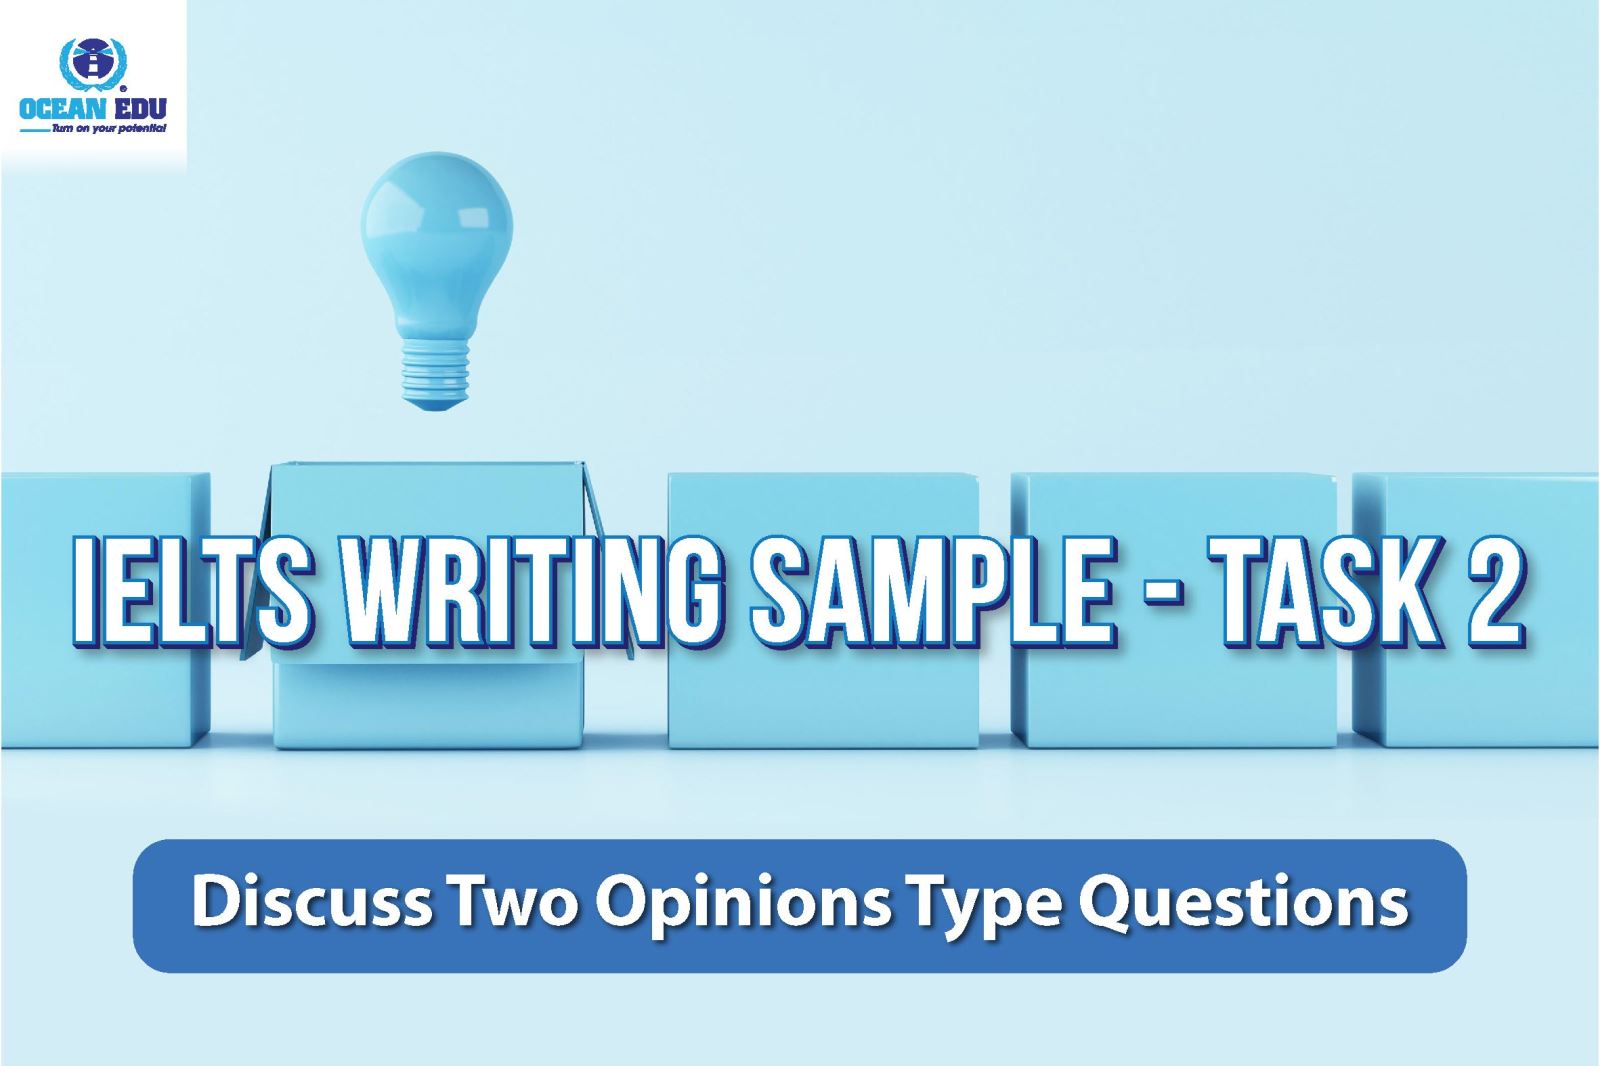 IELTS Writing Sample - Discuss Two Opinions Type Questions